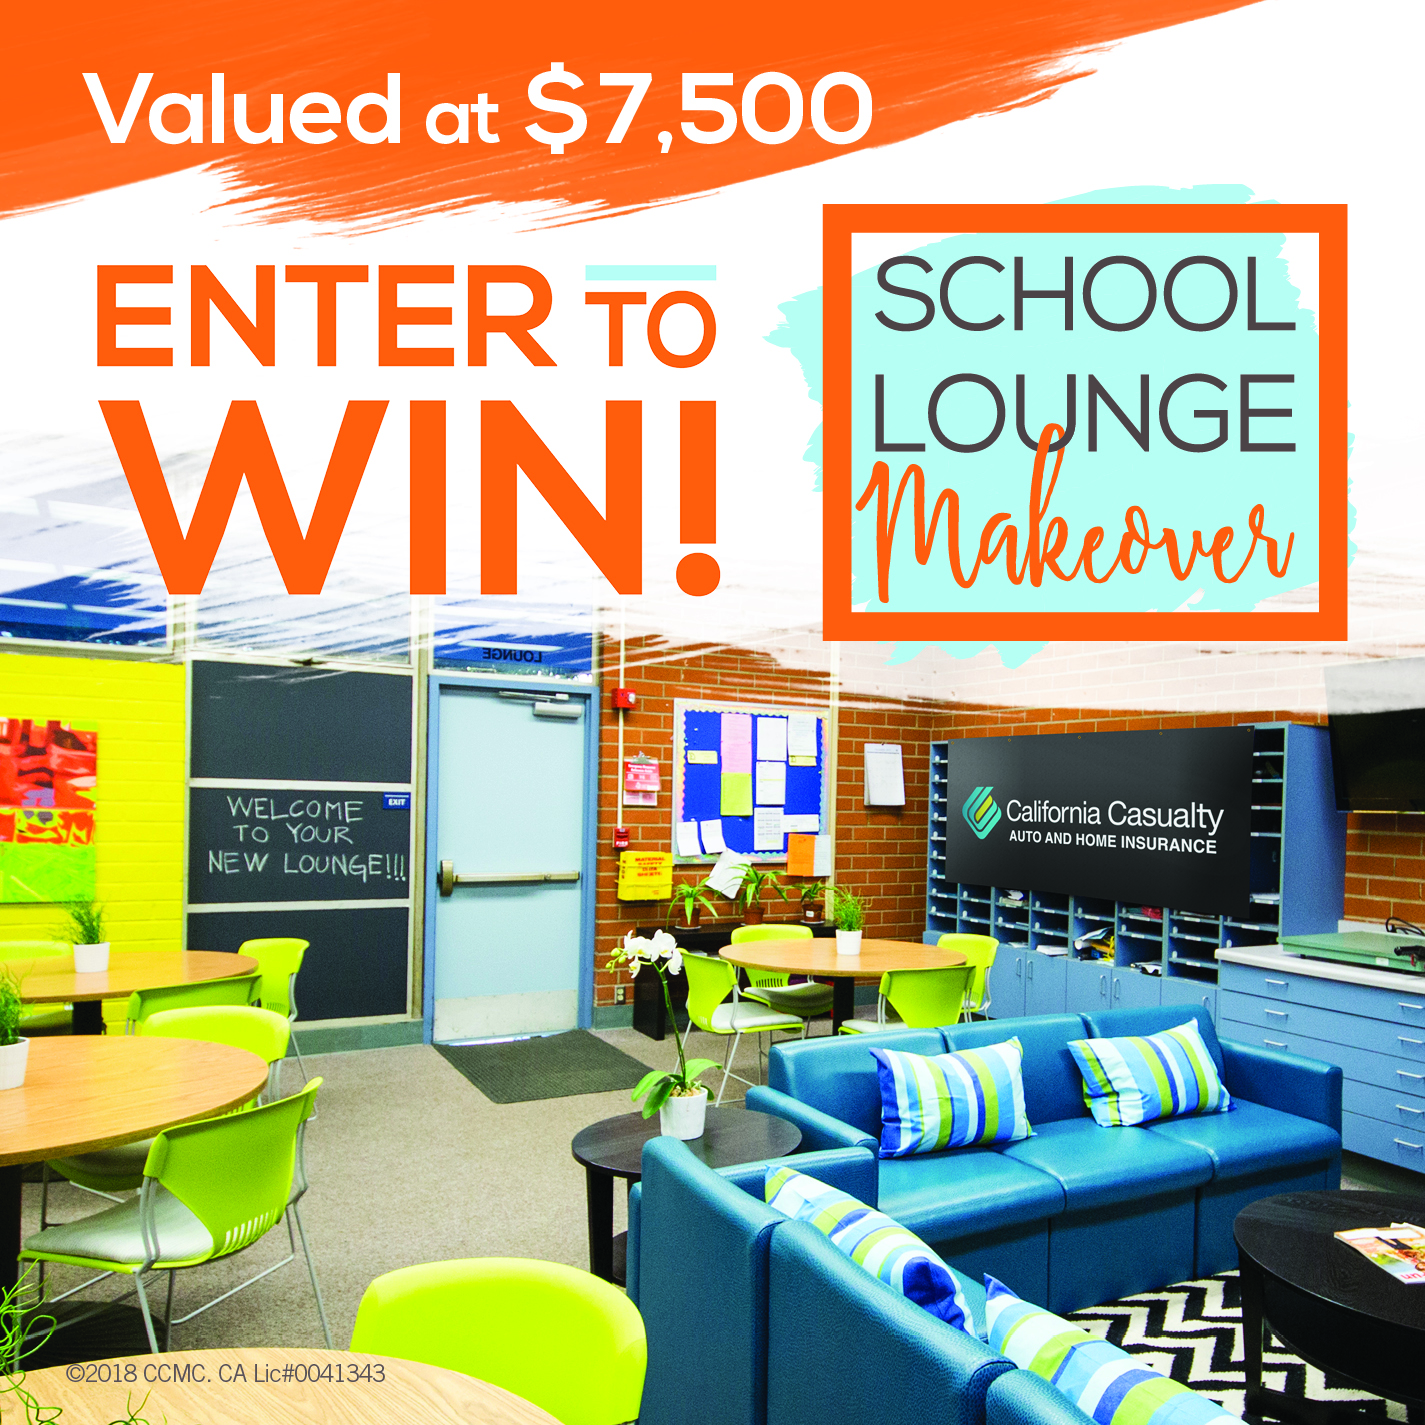 Enter California Casualty's School Lounge Makeover Contest